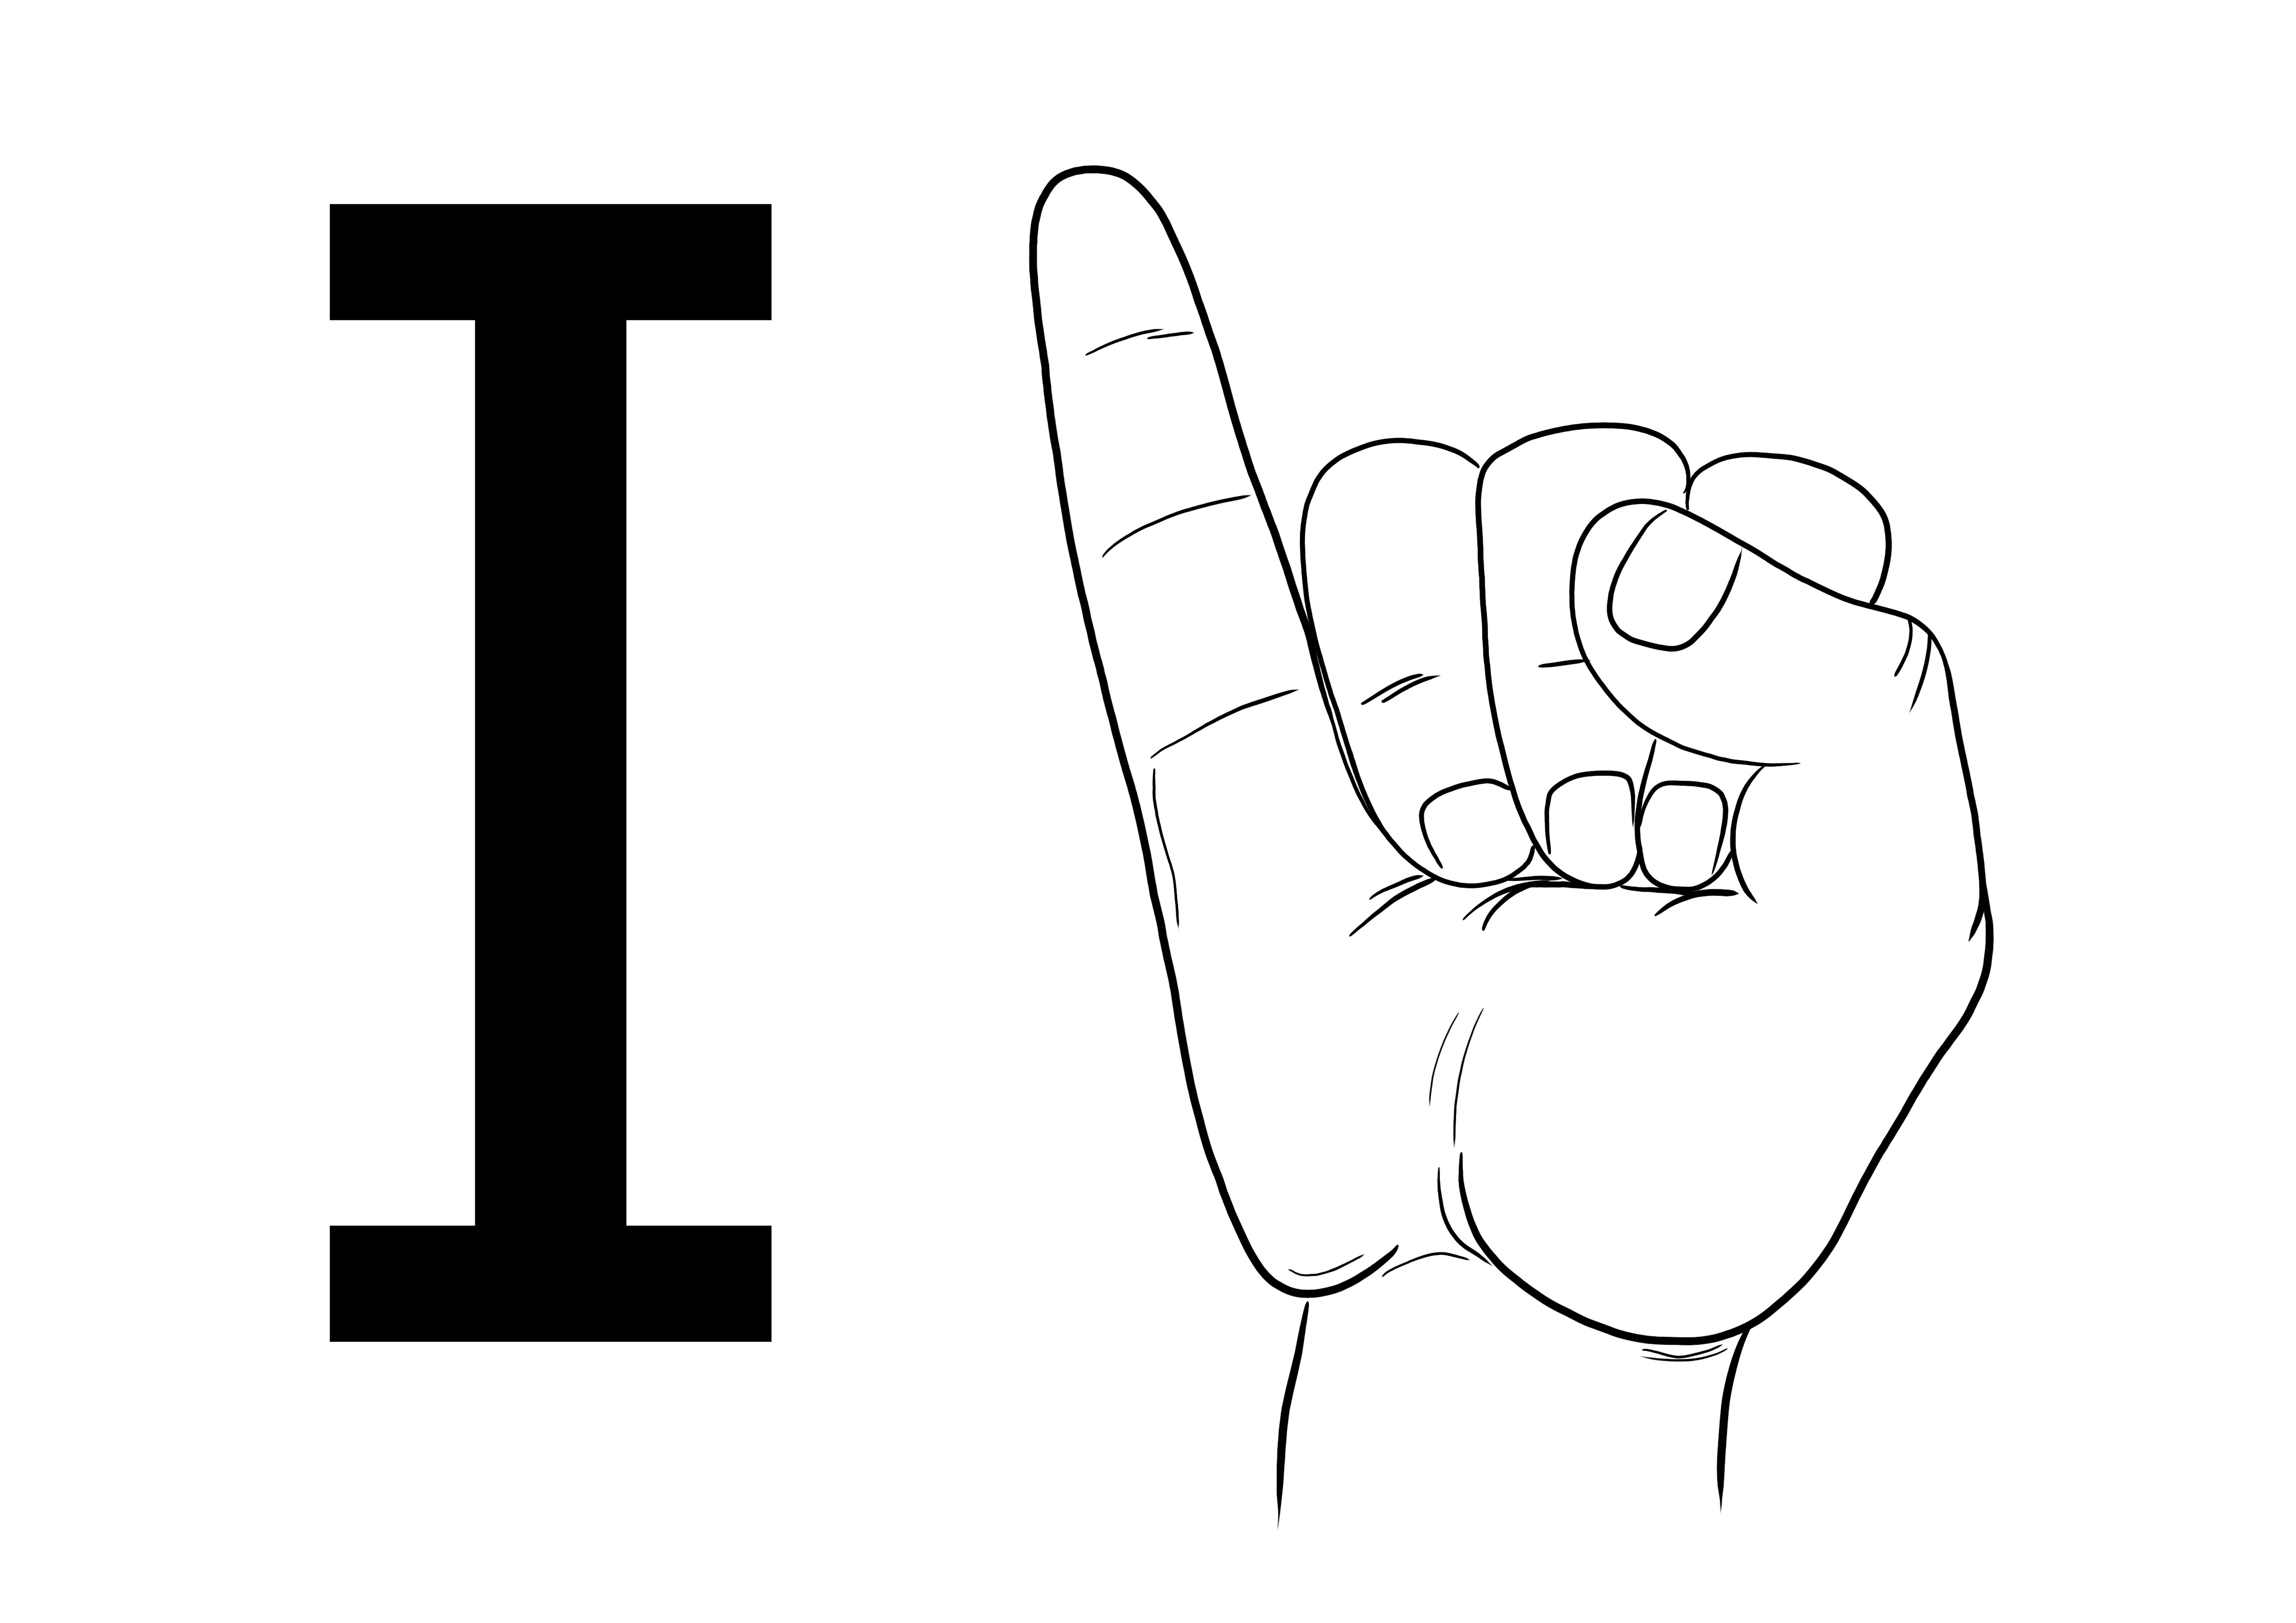 A coloring page free to print or download of ASL Sign Language Letter I to learn the alphabet